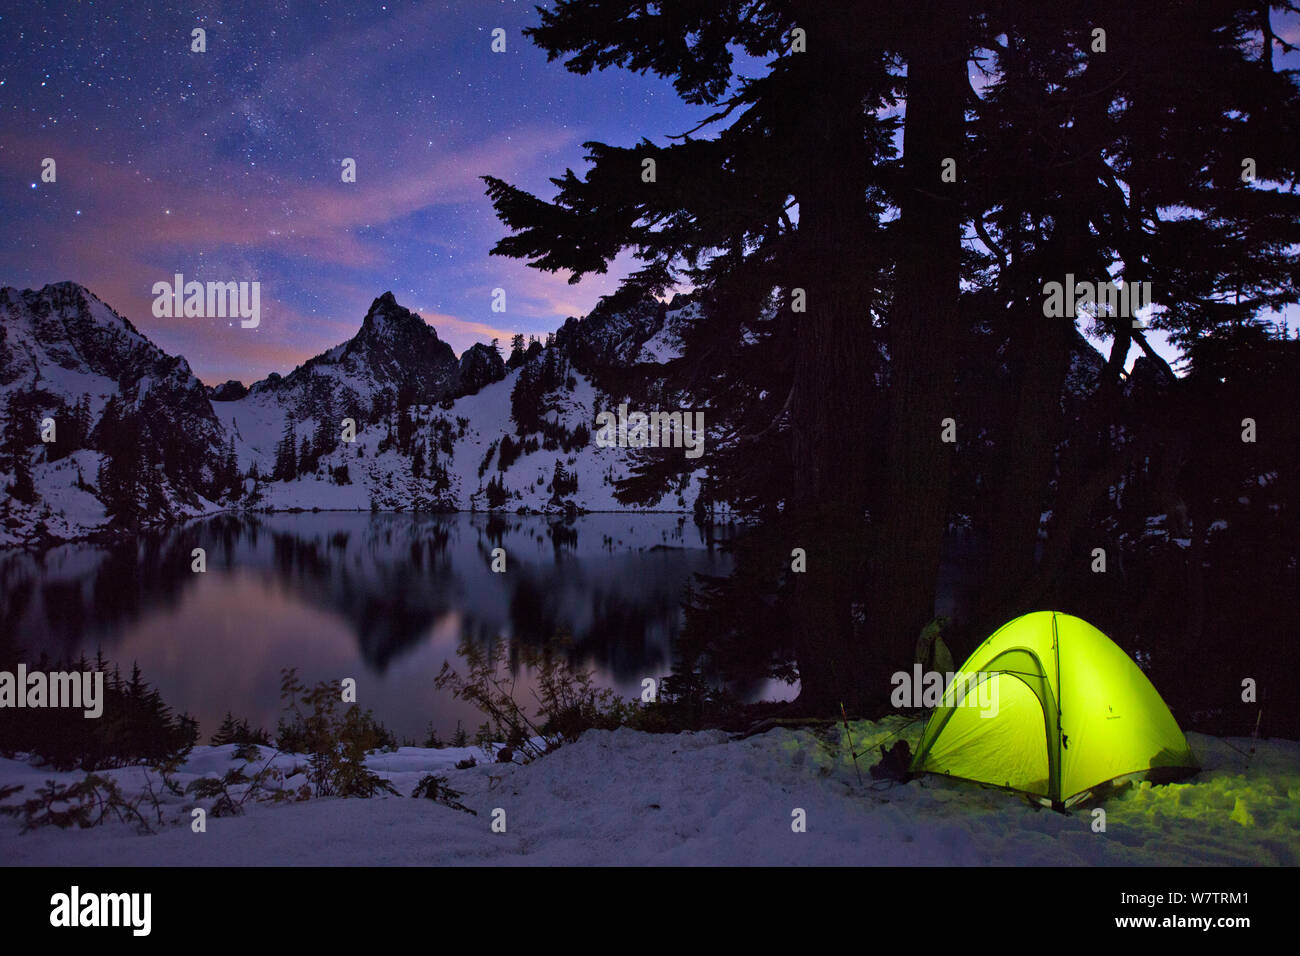 Tent lit up at night after an early winter snowfall, with Kaleetan Peak and Gem Lake, near Snoqualmie Pass, Cascades,  in Washington, USA, October 2013. Stock Photo